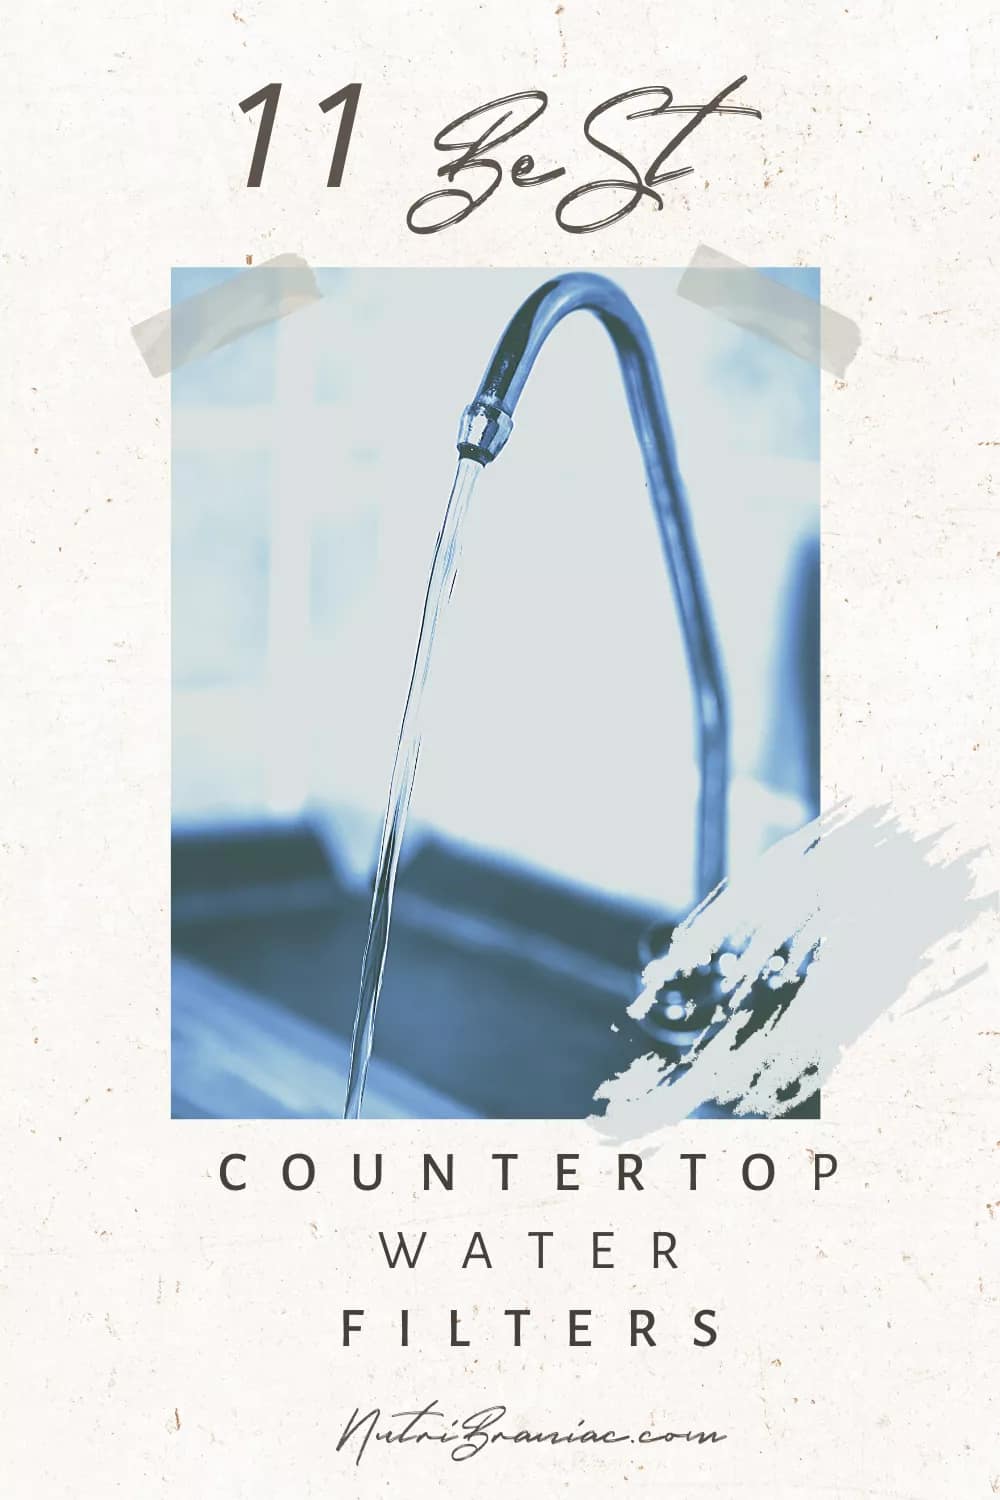 Black and white photo of a home filter water faucet with text overlay "11 Best Countertop Water Filters"